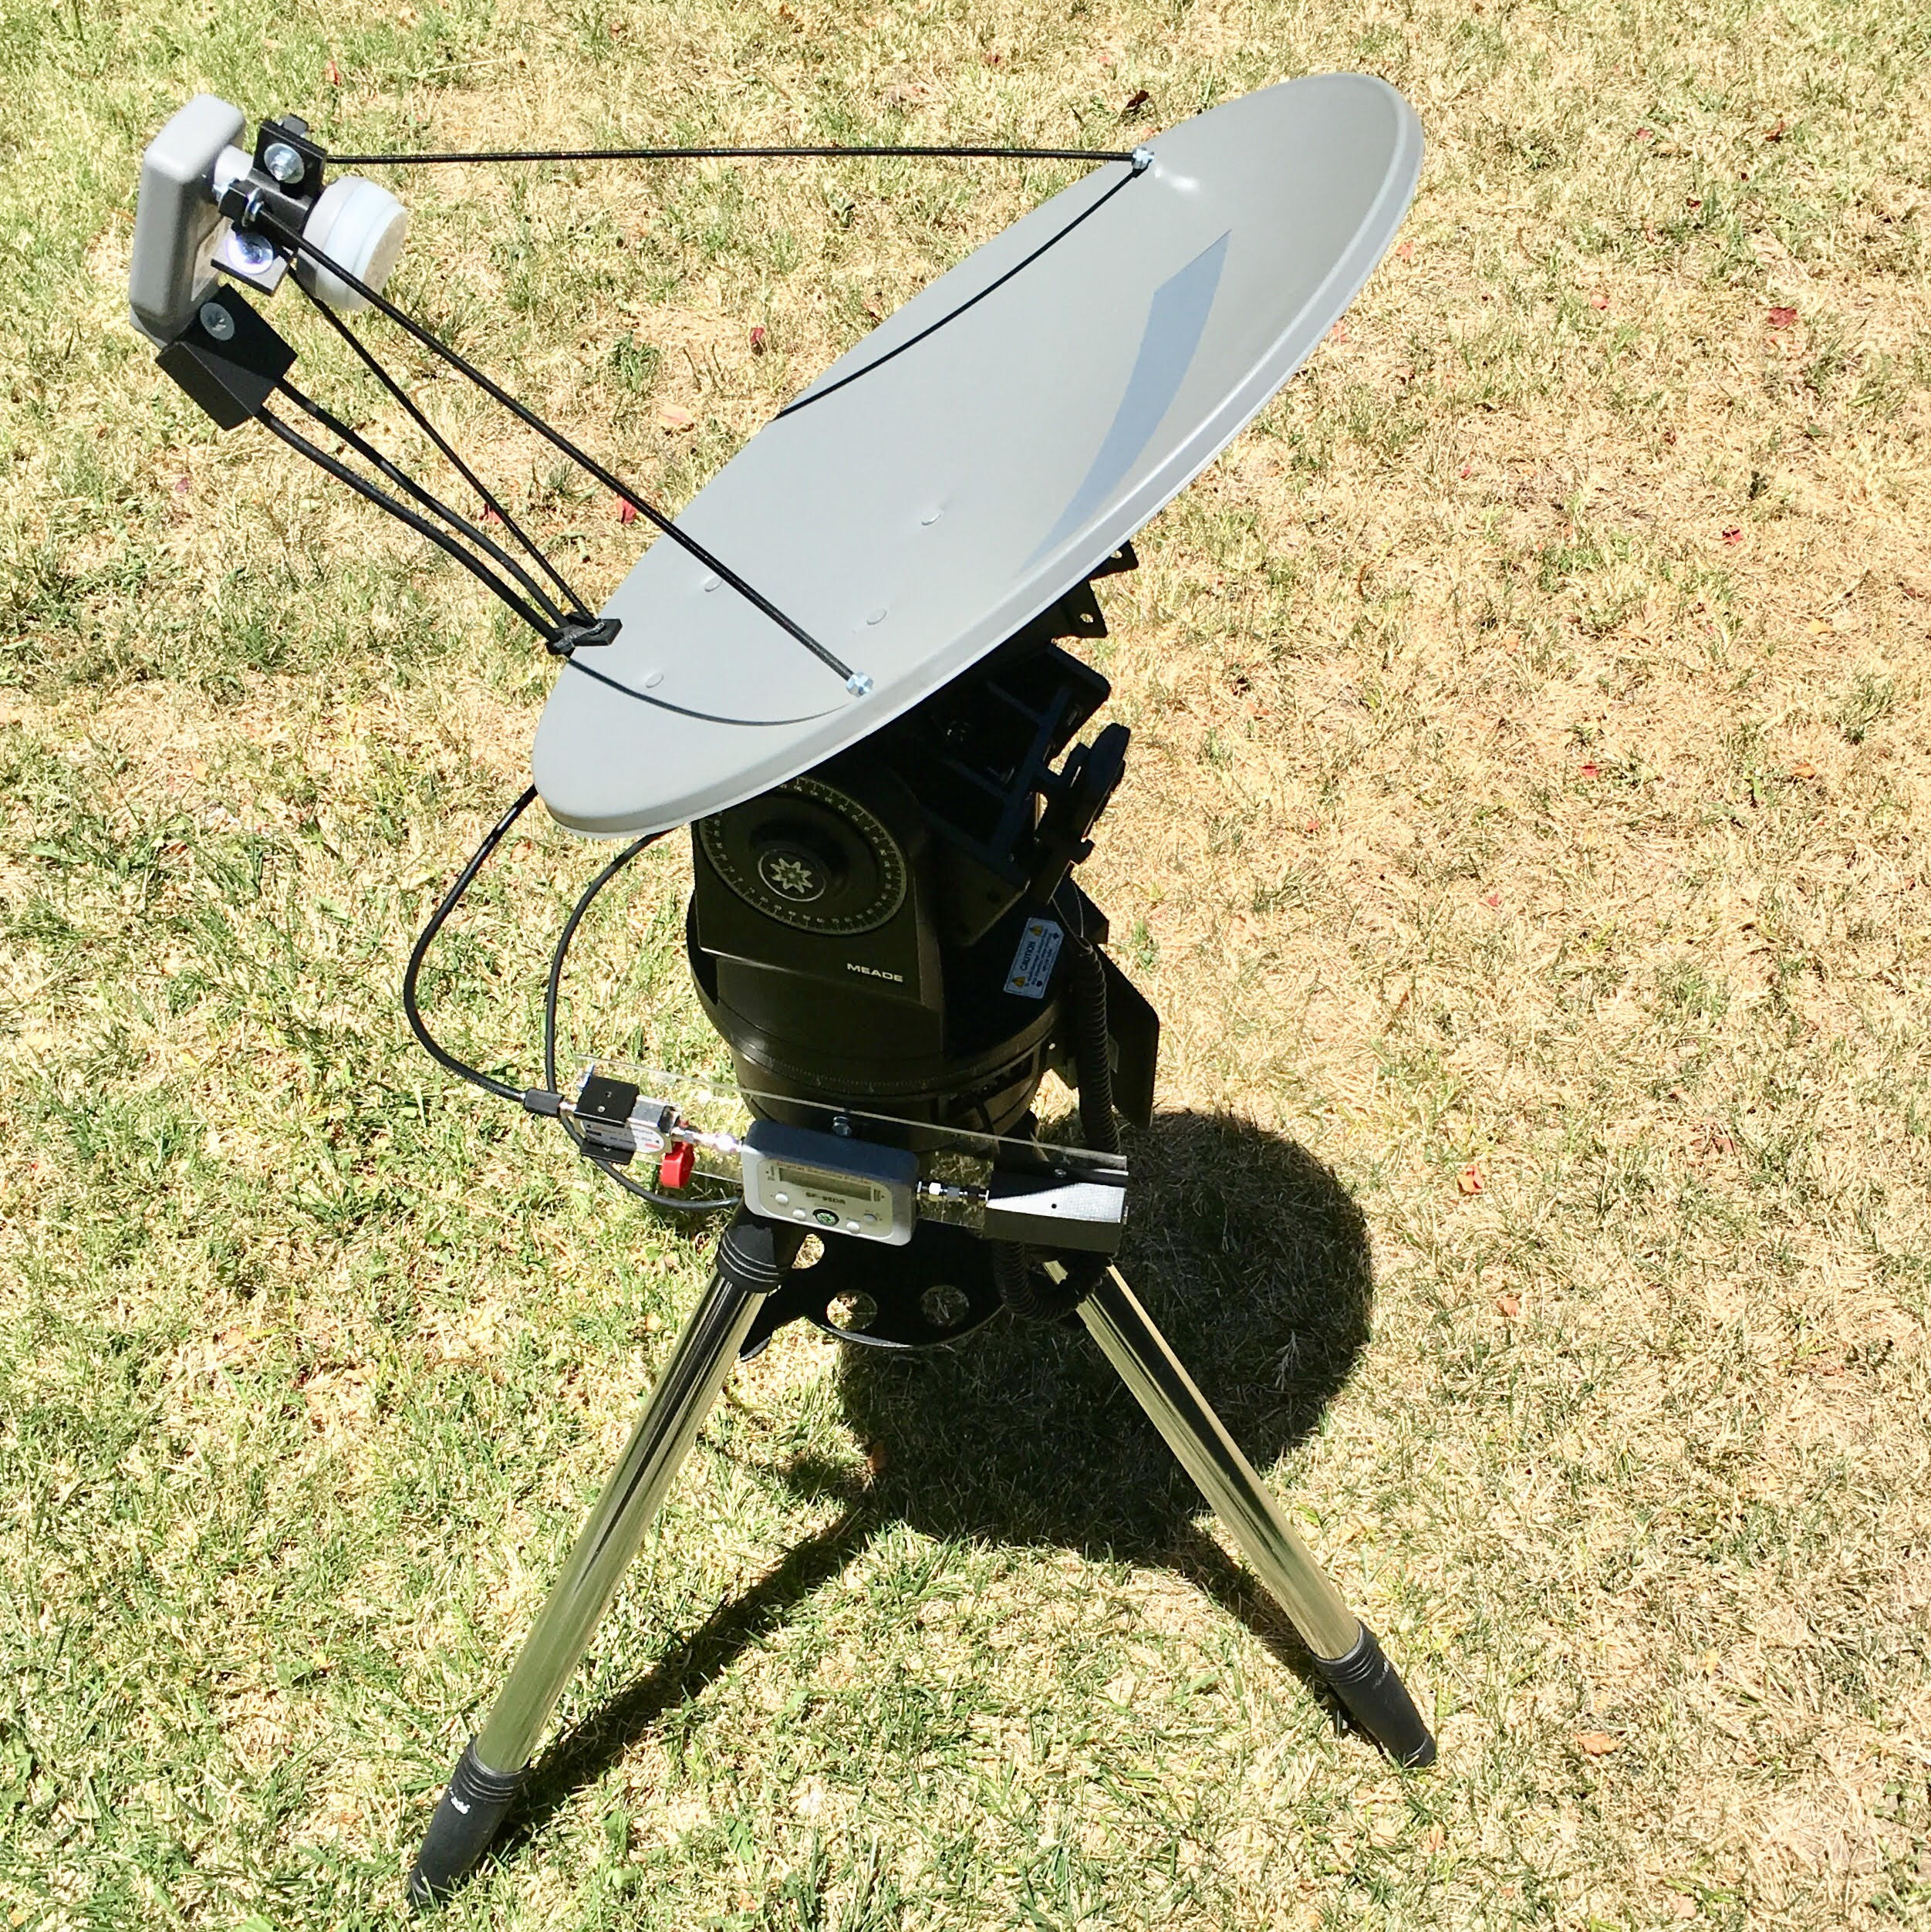 A Little Radio Telescope using a Meade Mount and a Satellite Dish